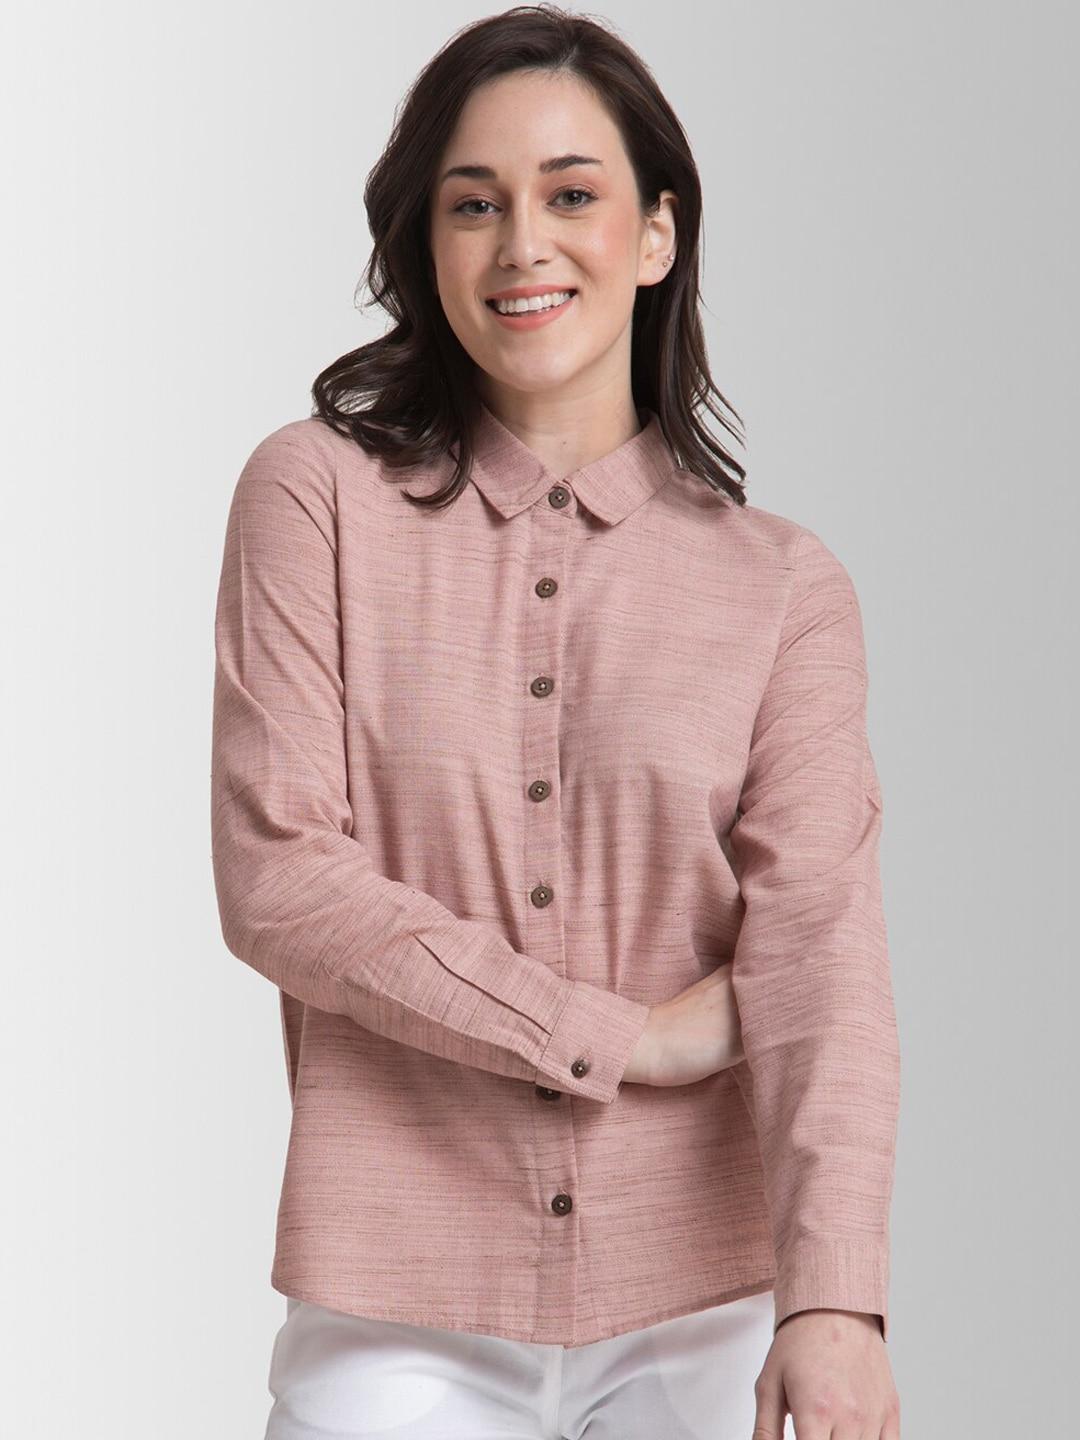 fablestreet-women-pink-boxy-solid-casual-shirt